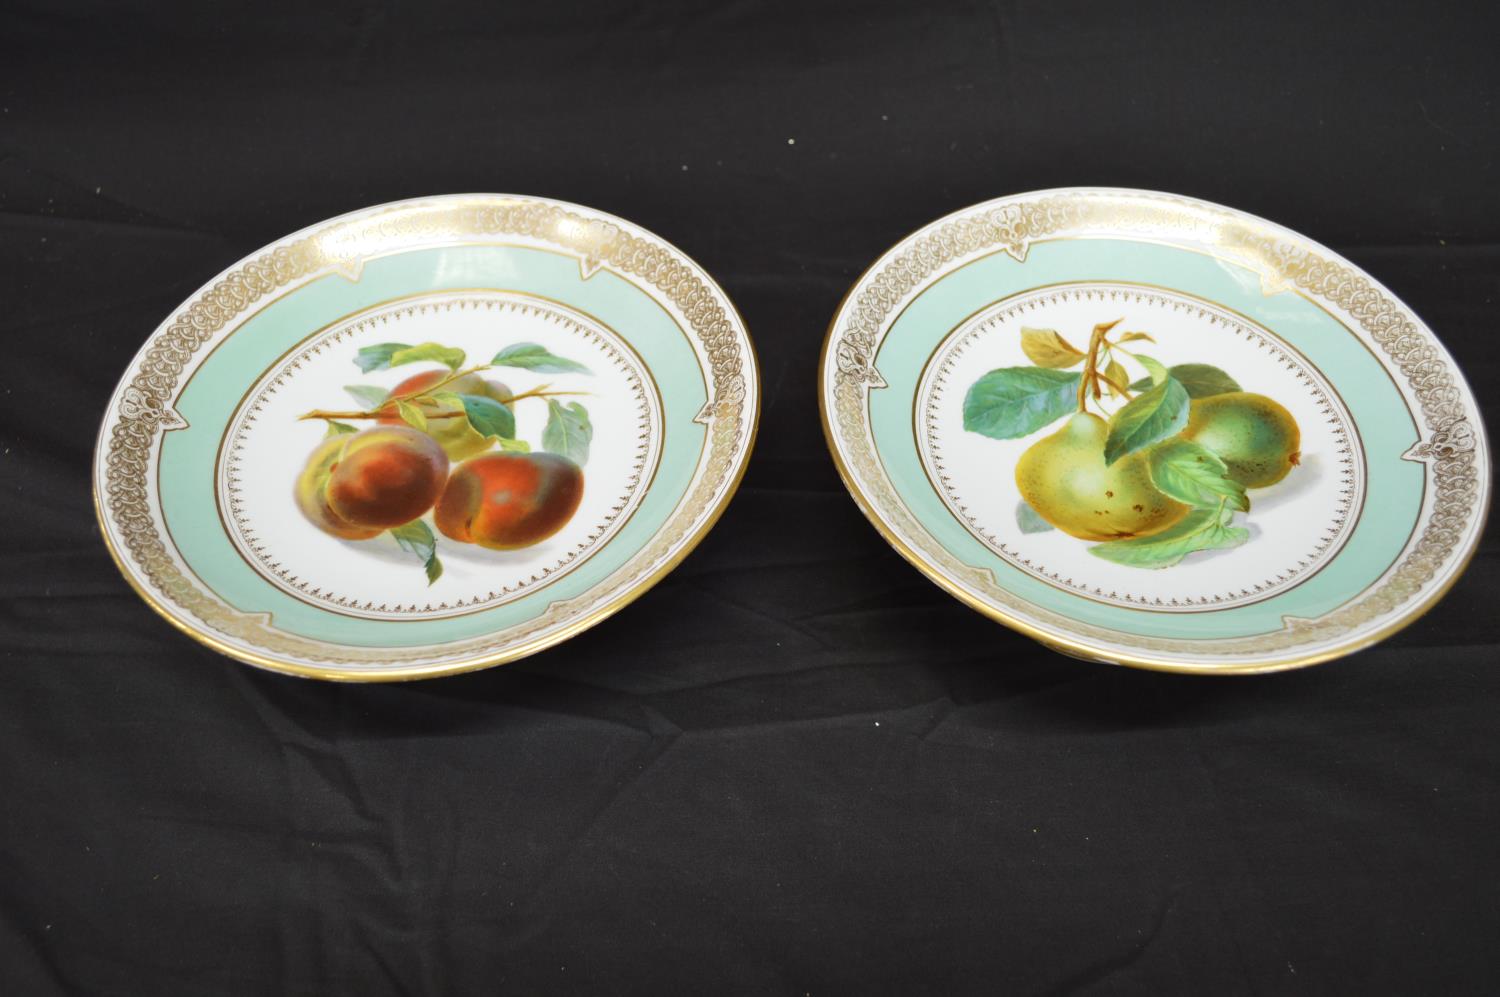 Pair of Continental porcelain tazza's each decorated with central panel of fruit with pale green and